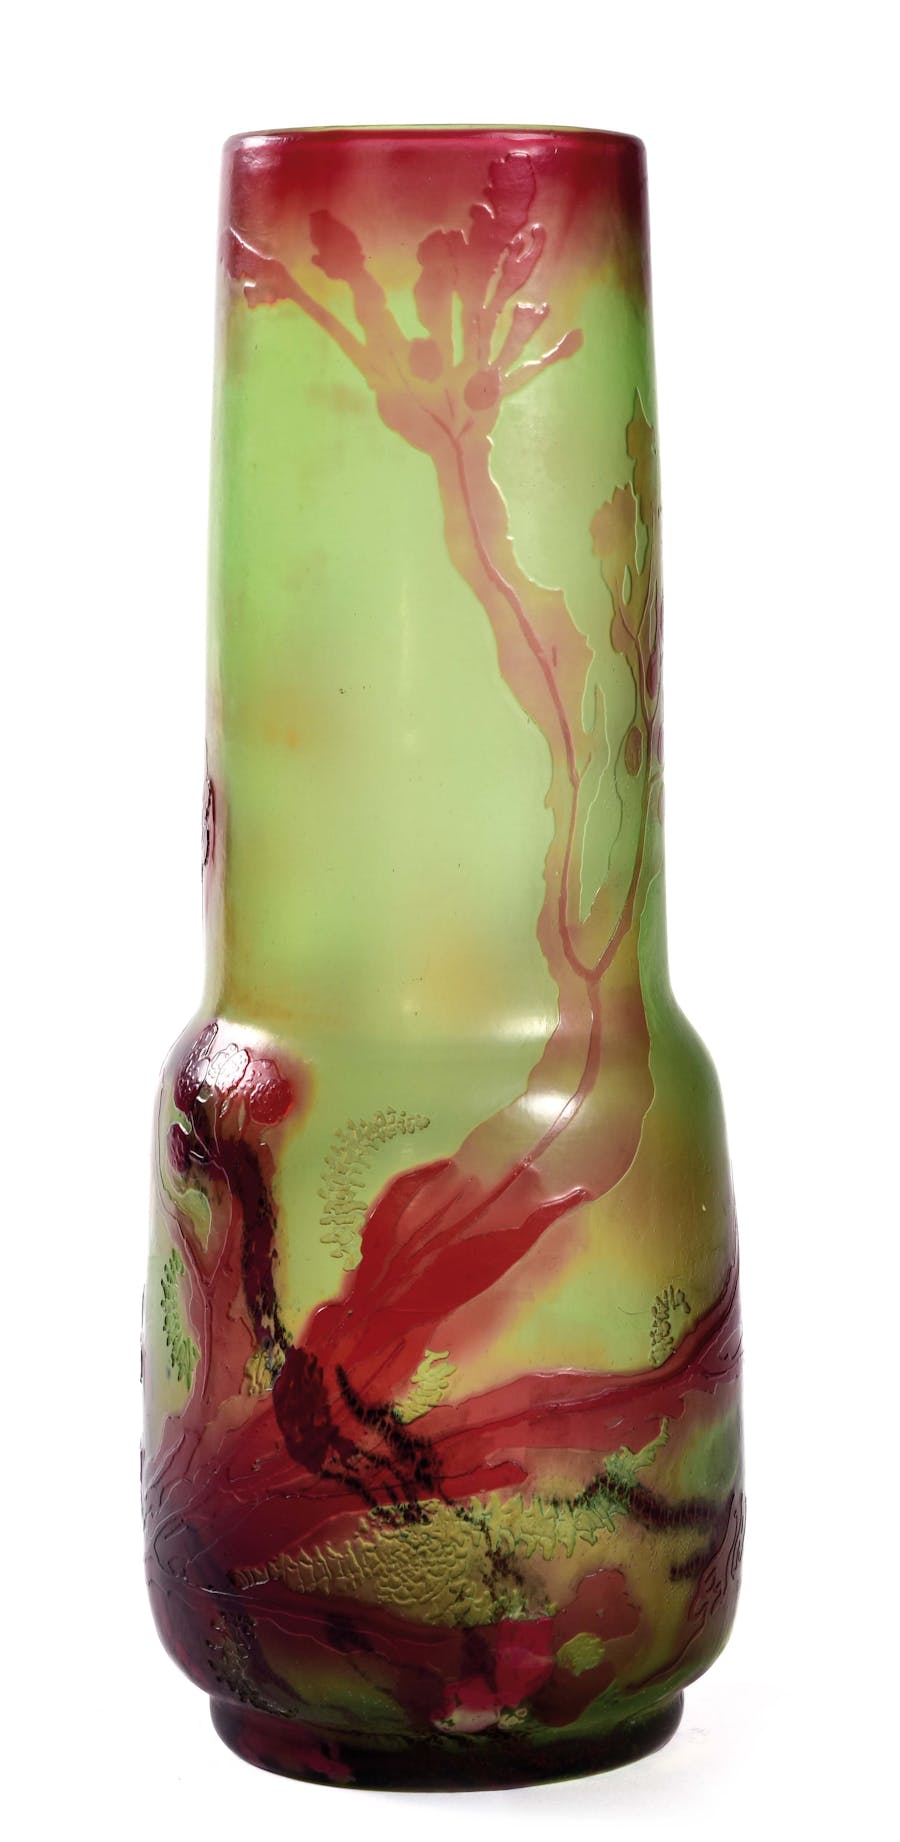  Émile Gallé (1864-1904), ‘Vase with Tubular Neck’, red glass on green powder background with metallic spacers, 30 cm tall. Image: Rossini 